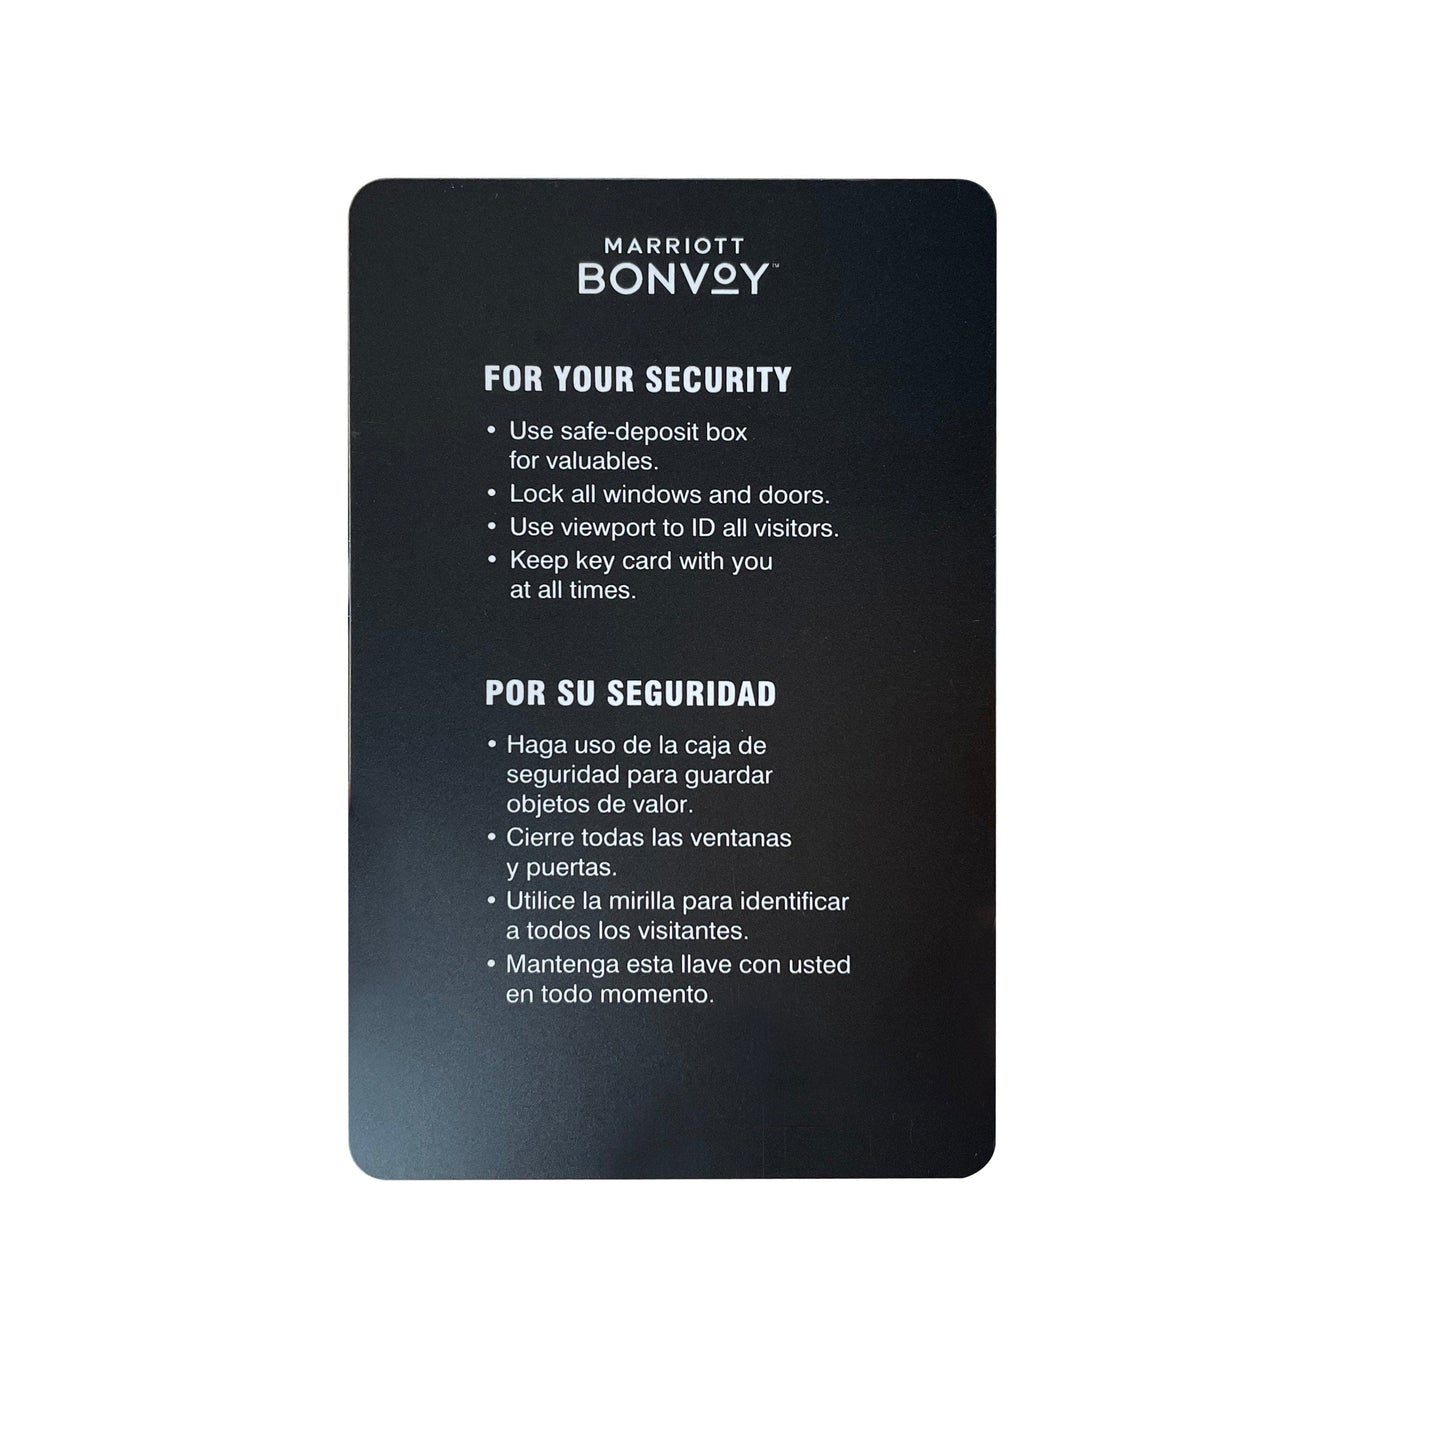 Assa Abloy Compatible Marriott Bonvoy Member RFID Key Cards (Sold in boxes of 200)